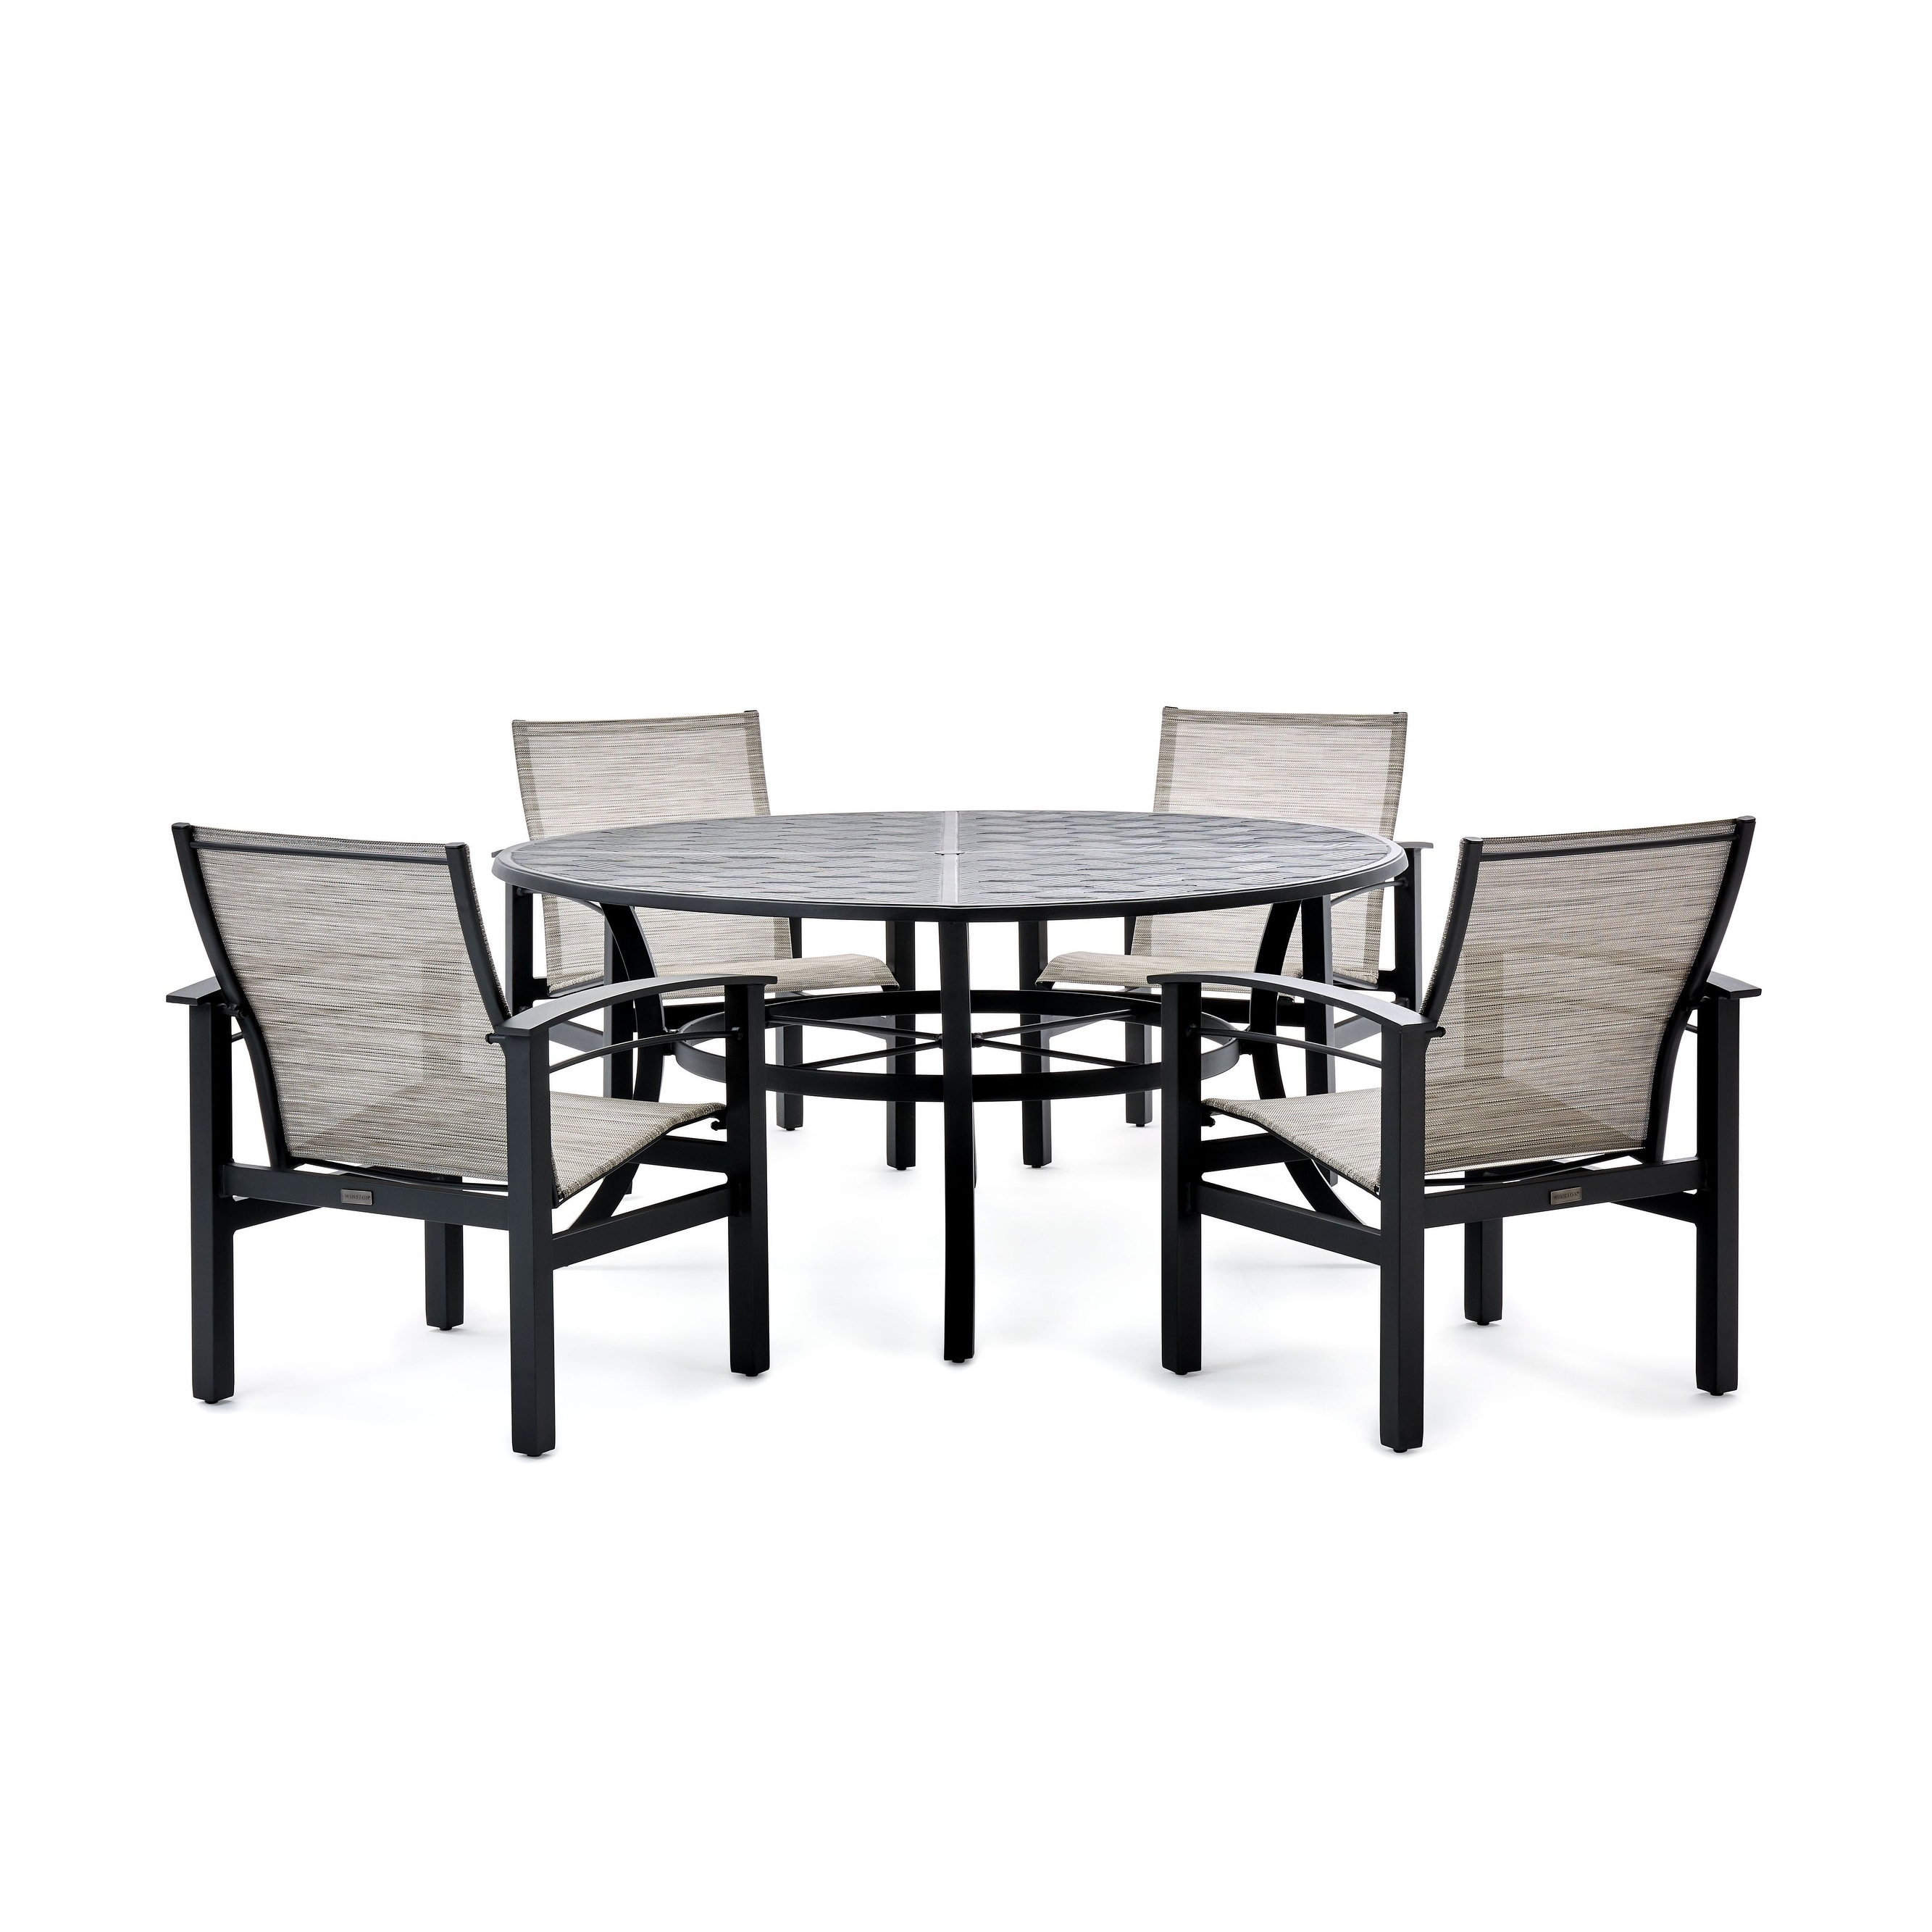 Stanford Sling 5pc Dining Set (4 Chairs  Round Table)